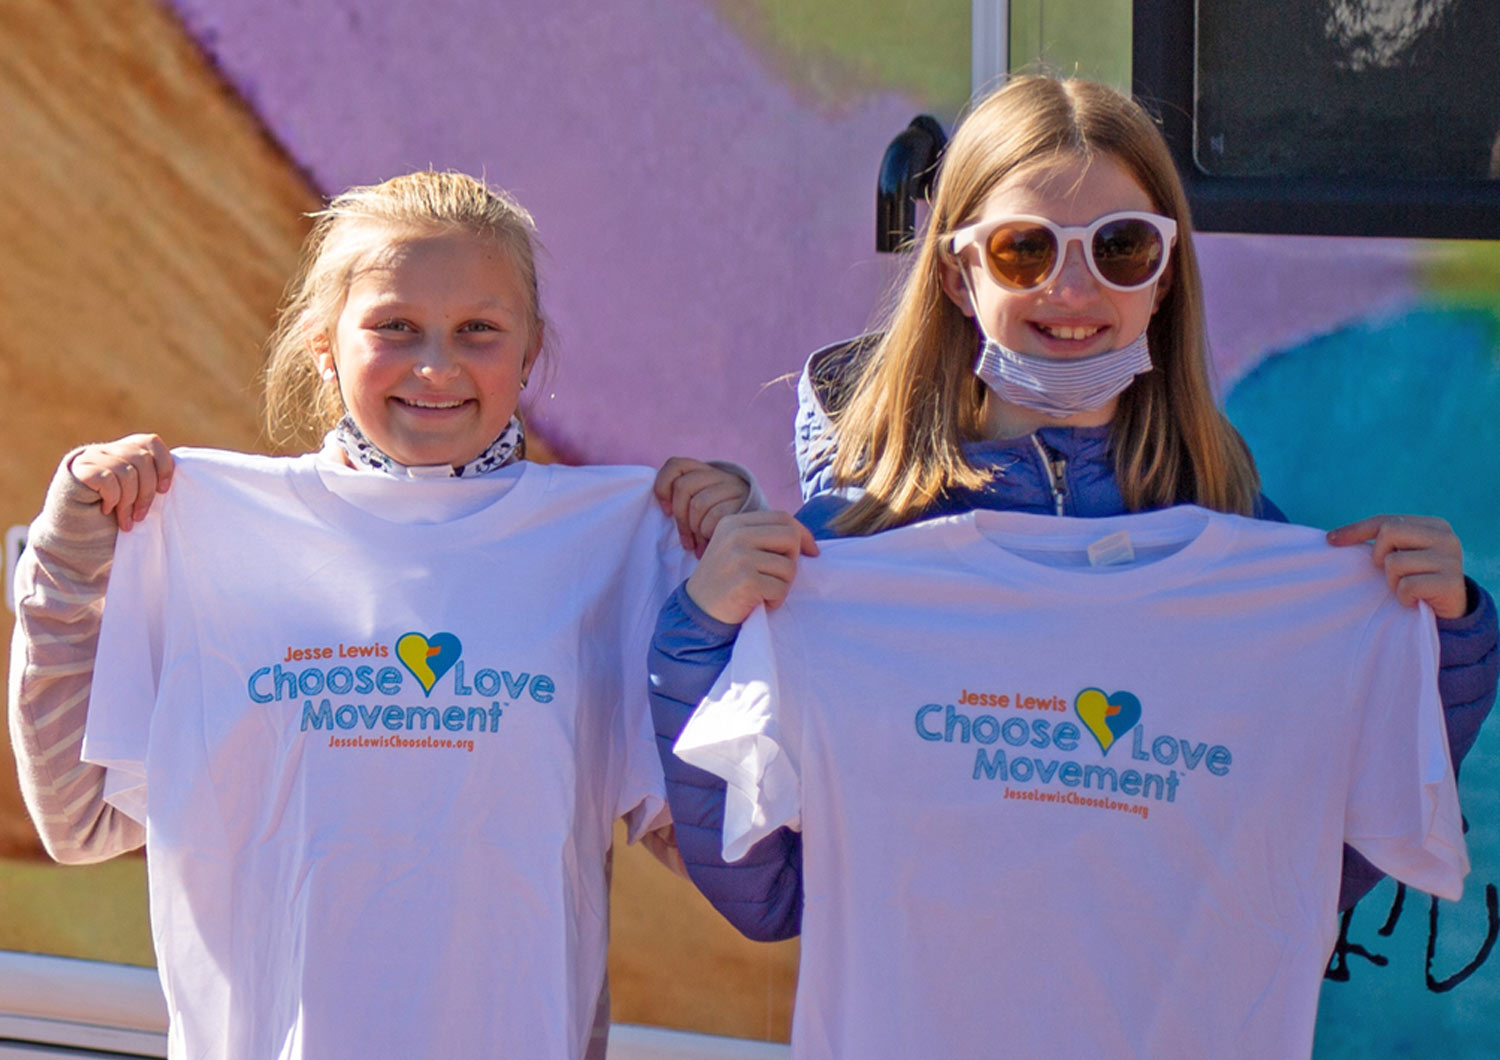 two young girls smile holding "ChooseLove Movement" t-shirts